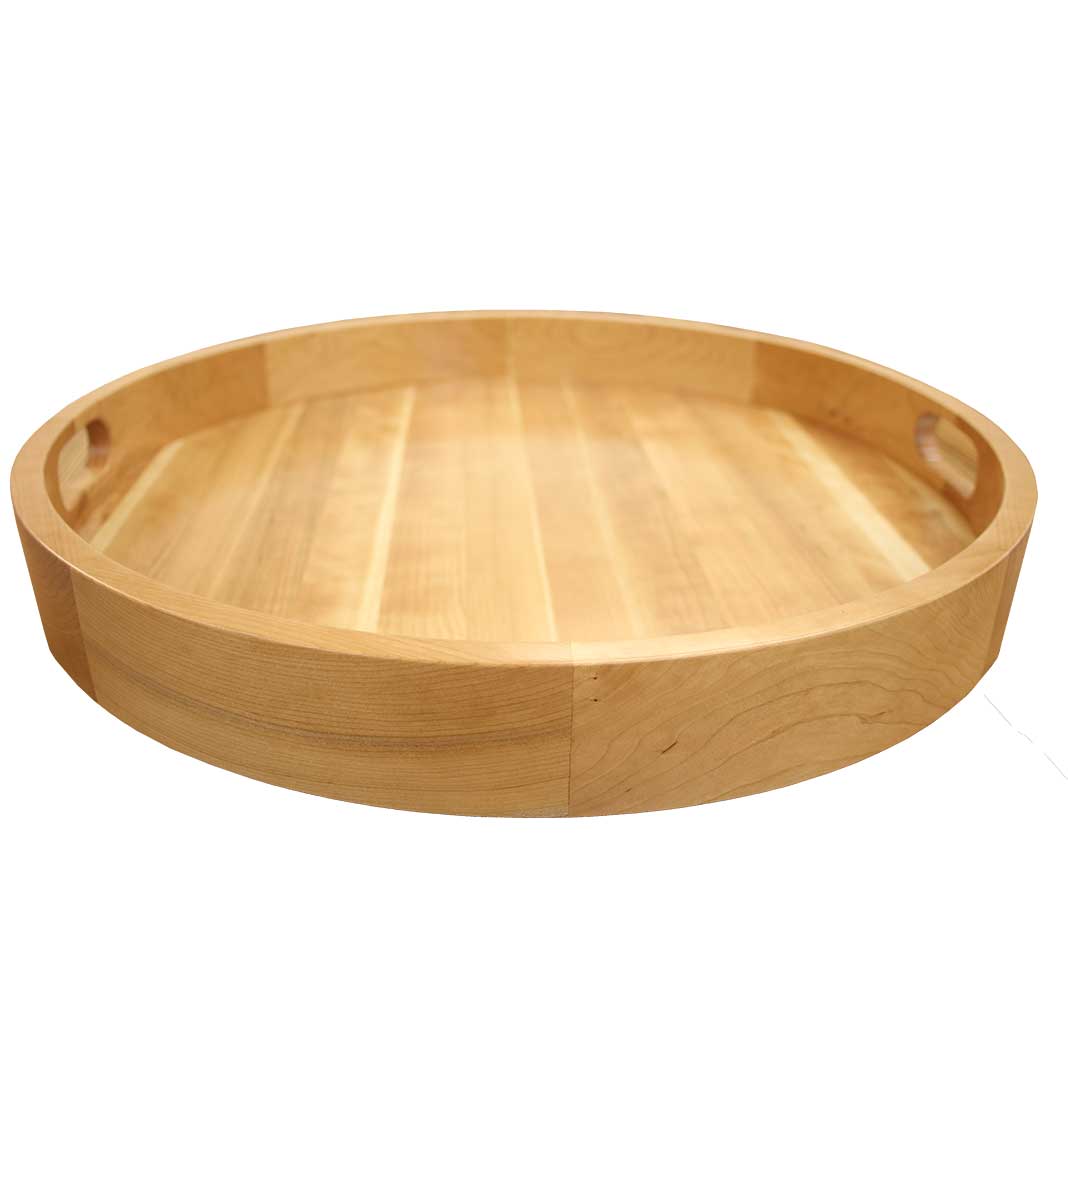 Grothouse American Cherry Wood Serving Tray